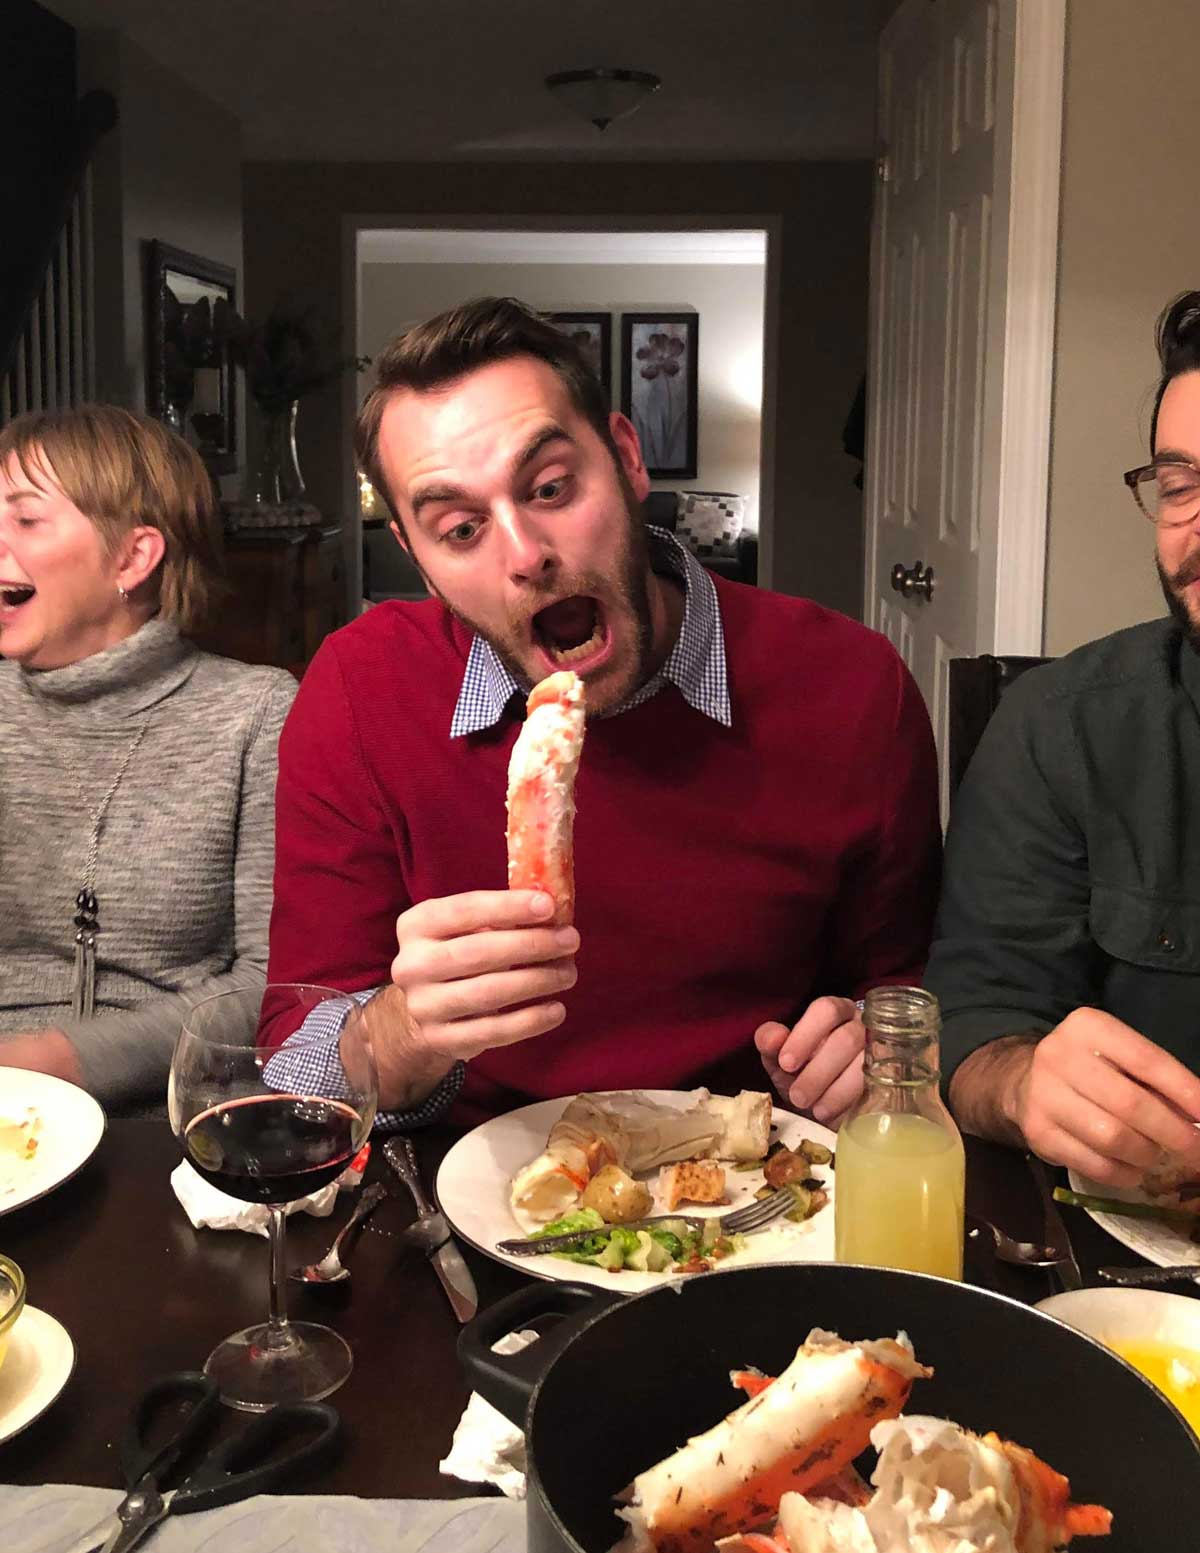 Pulled out this unbelievably phallic crab leg at my mom's birthday dinner. Finally understanding why she requests crab every year